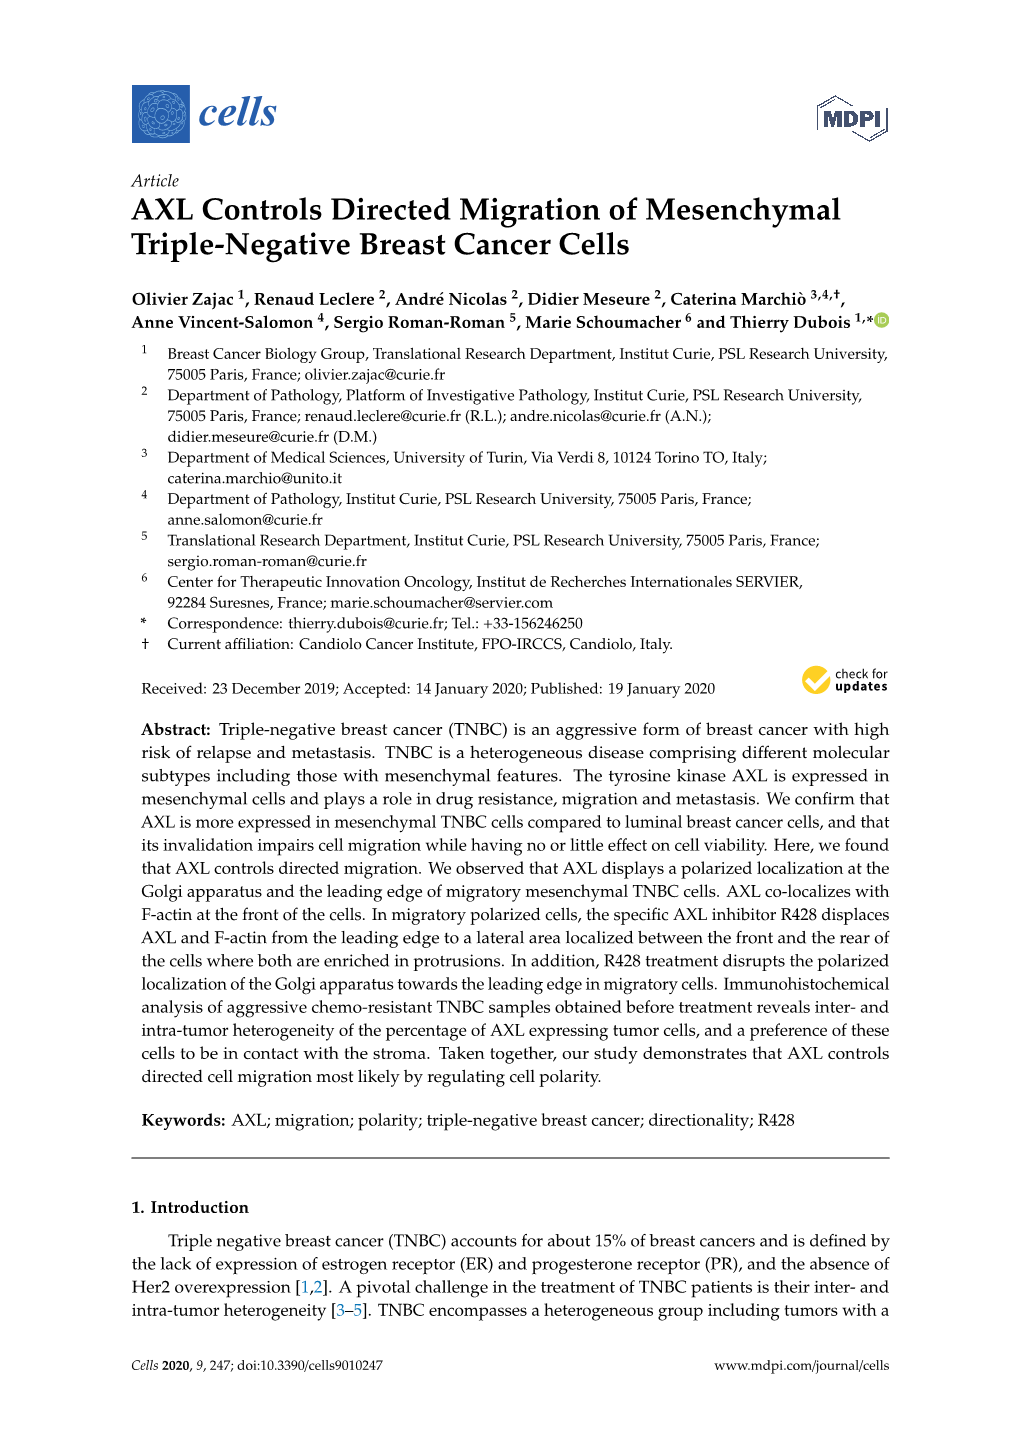 AXL Controls Directed Migration of Mesenchymal Triple-Negative Breast Cancer Cells